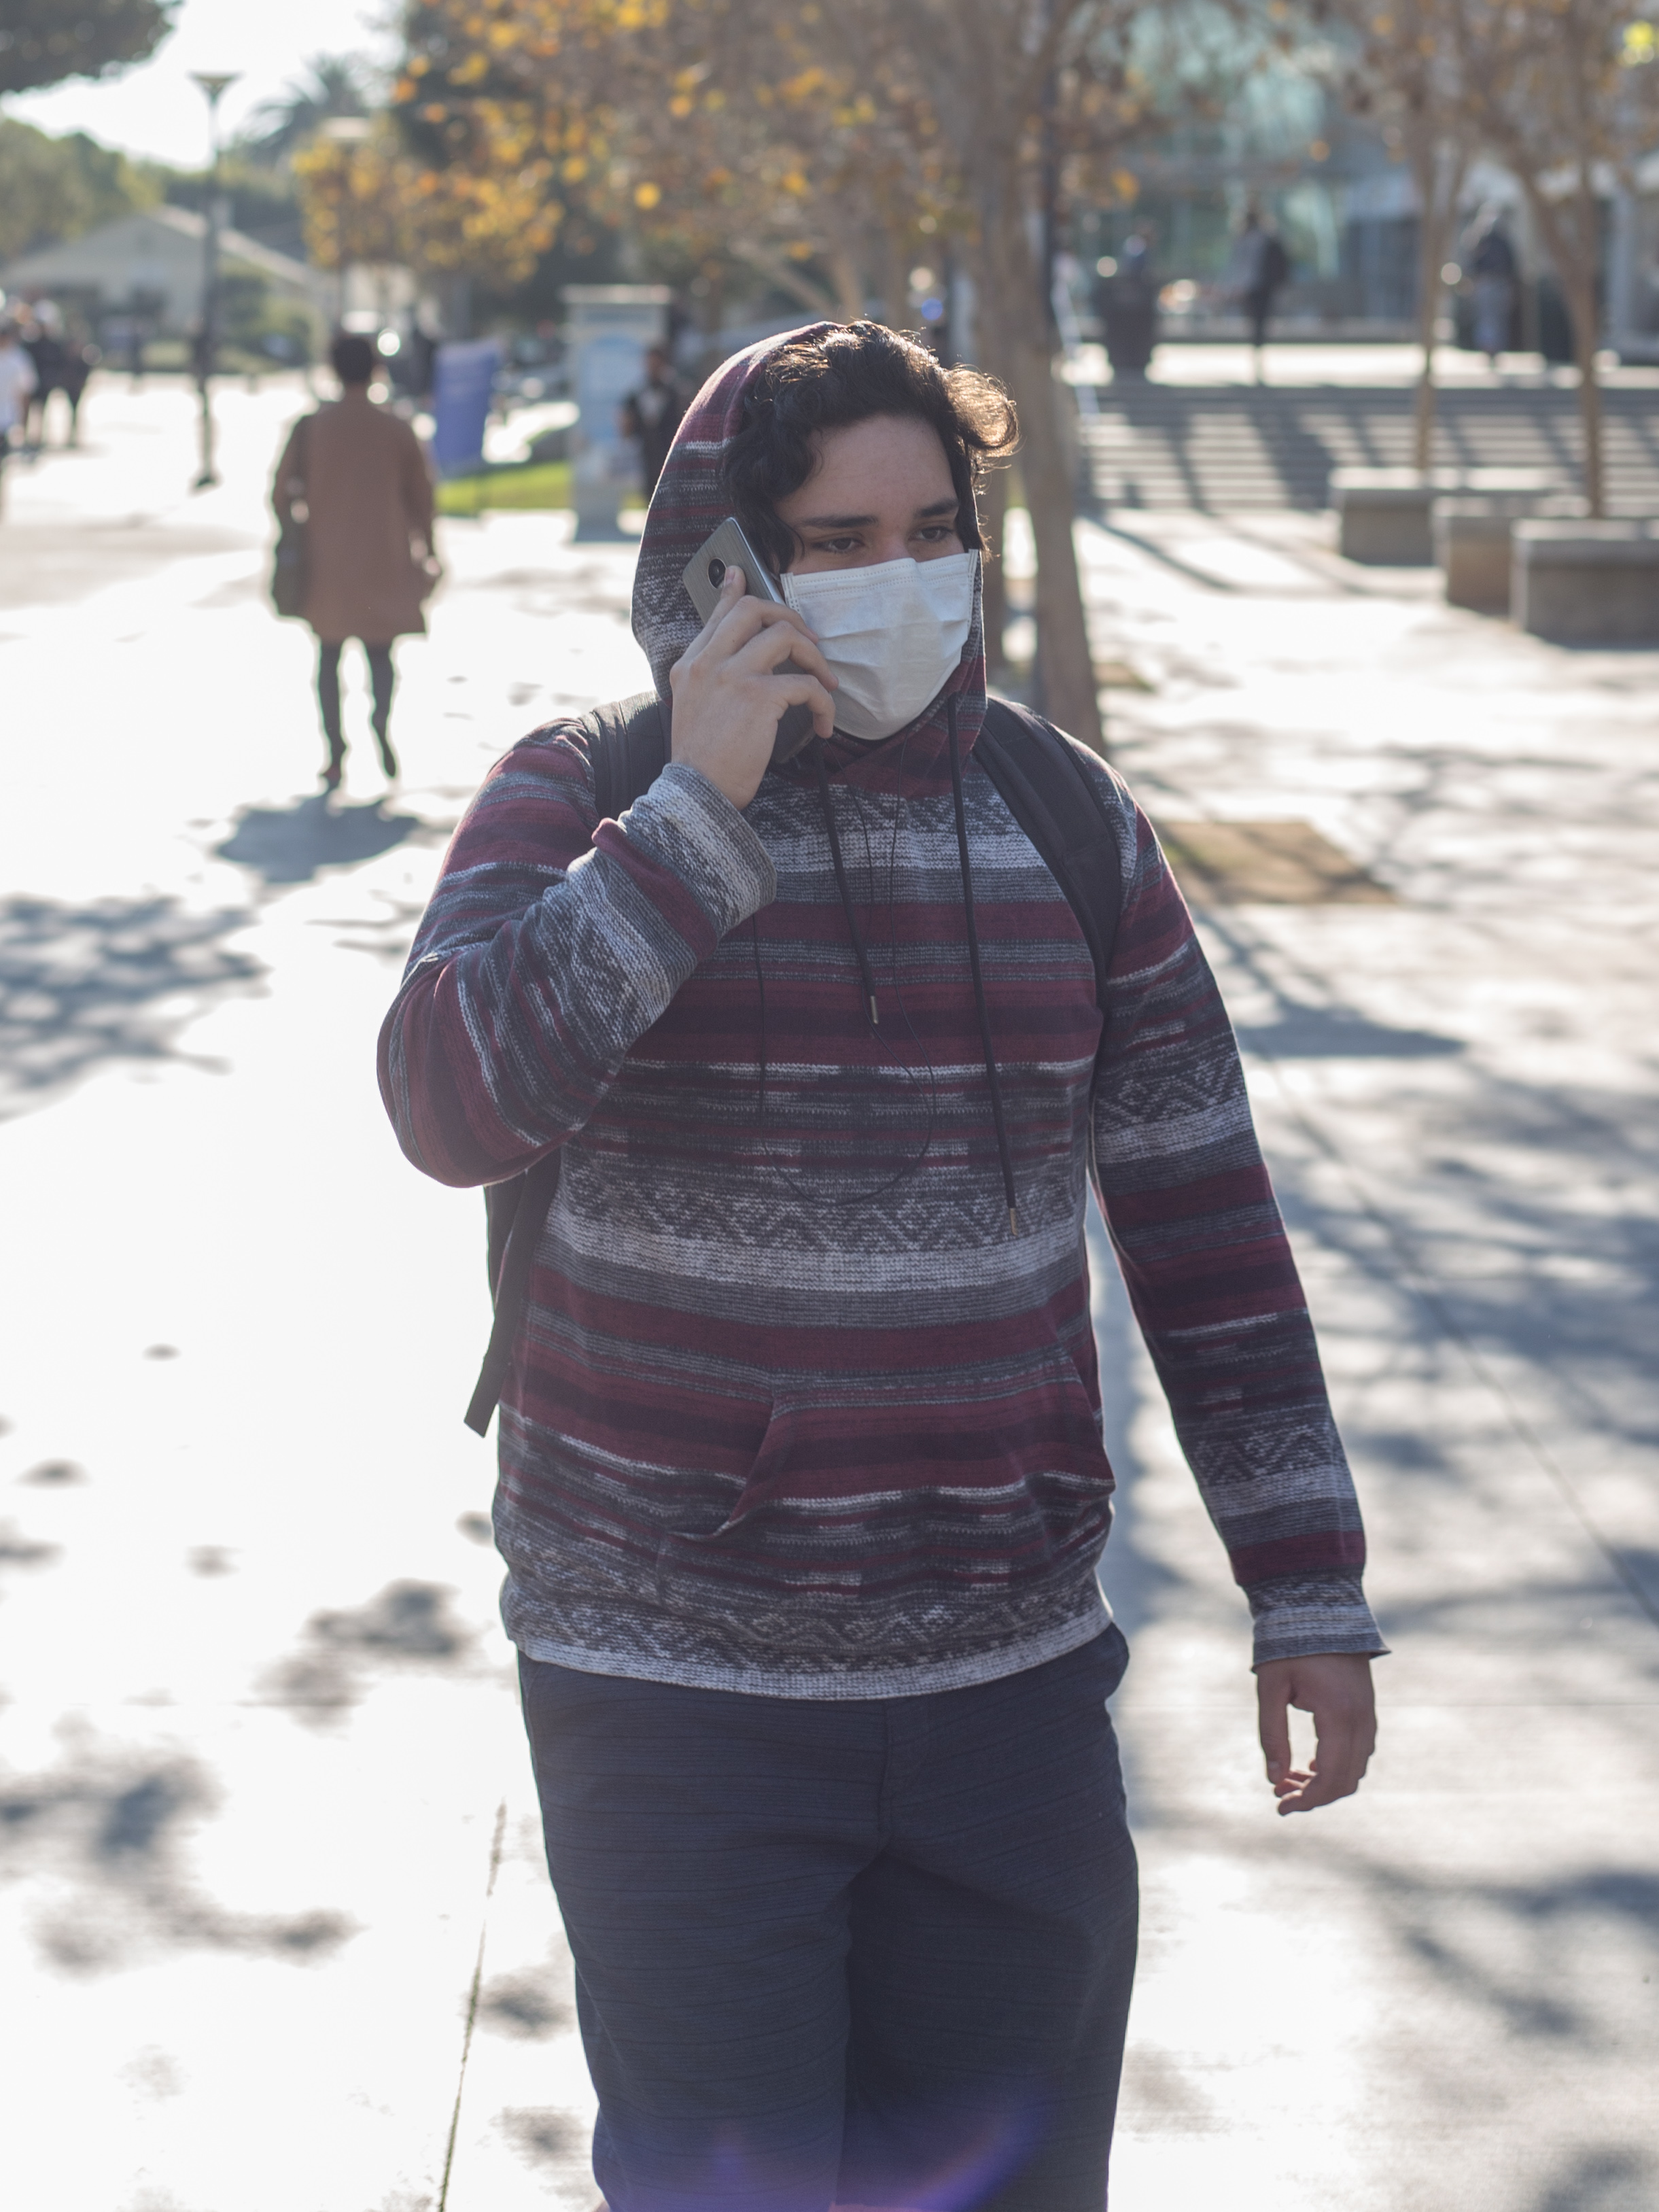  SMC Student walks on campus with a mask over his mouth and nose due to the poor air quality as a result from the Skirball fire after an email was sent out at 8:49 am by SMC informing students that classes are canceled due to the close proximity to t